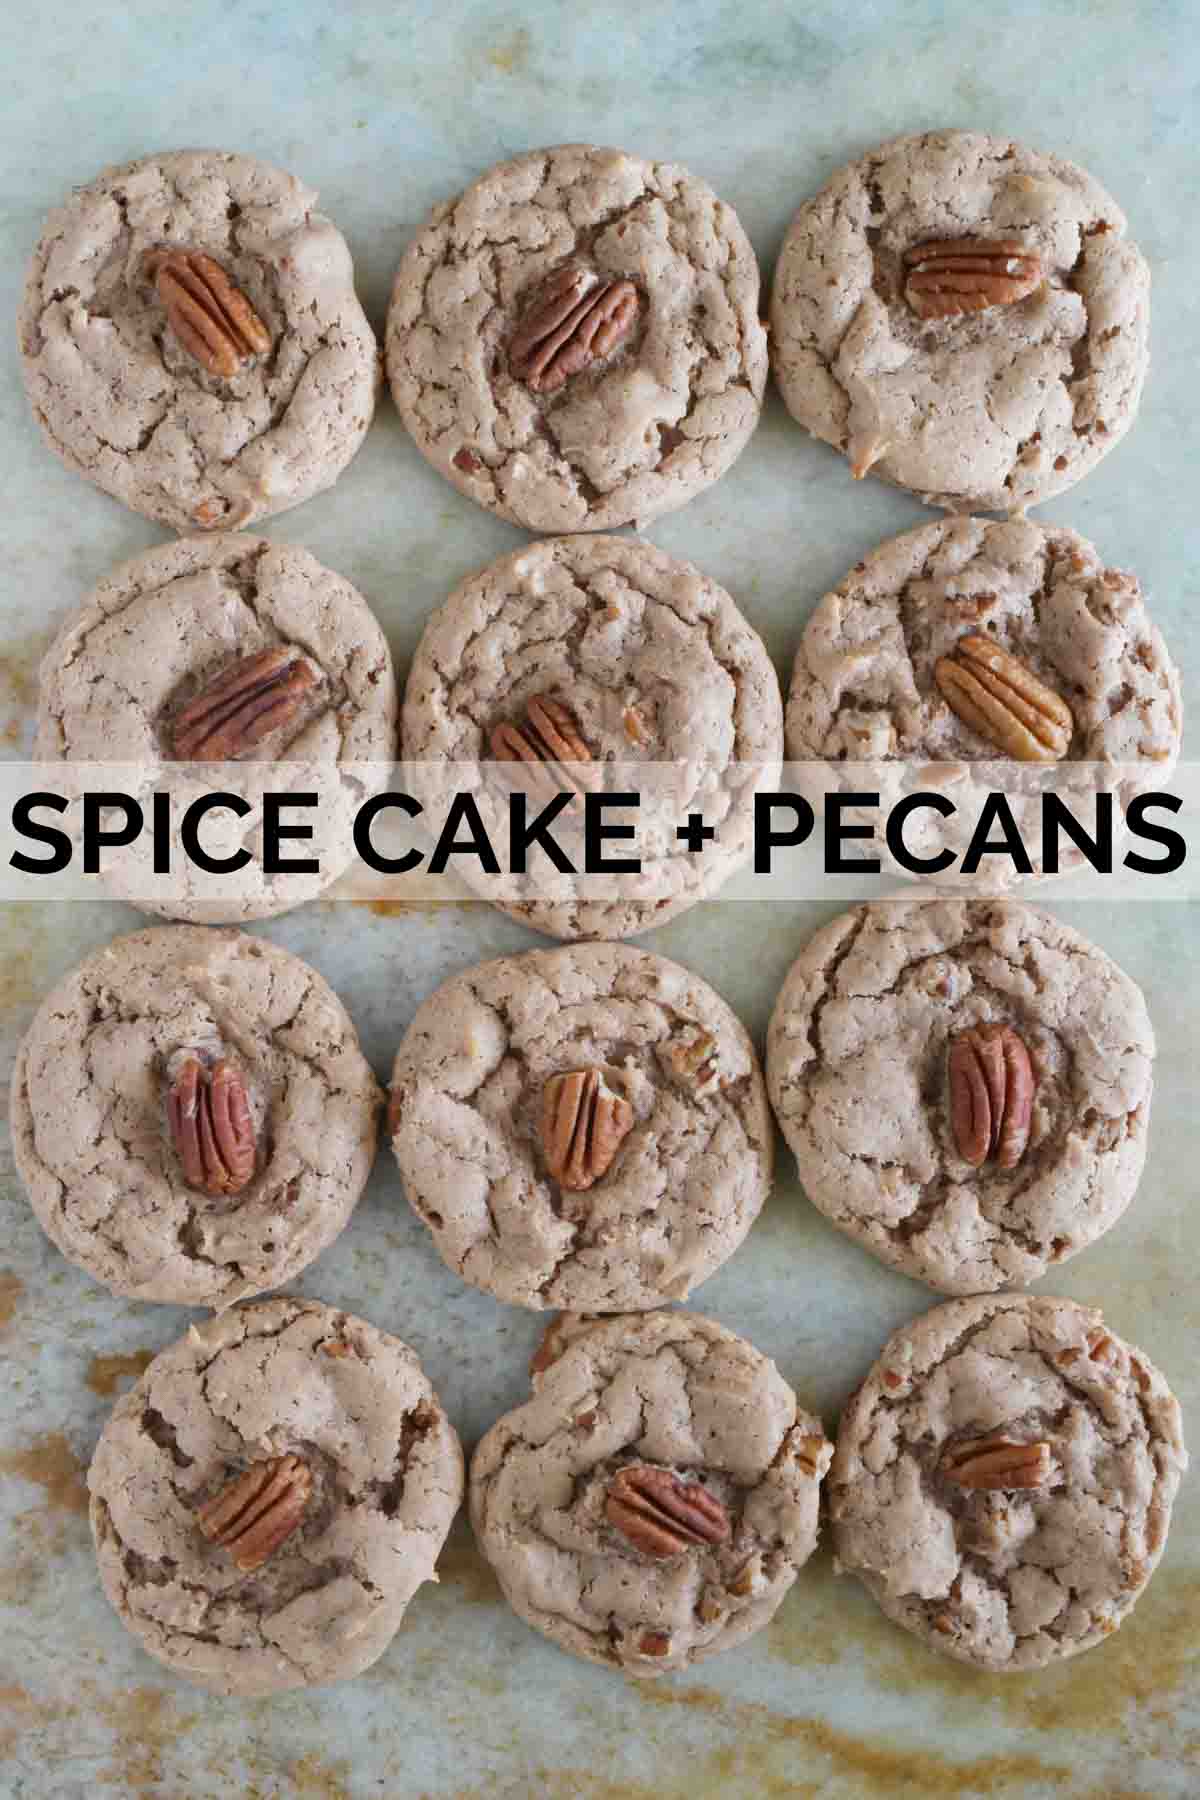 Cake mix cookies made from spice cake mix and pecans